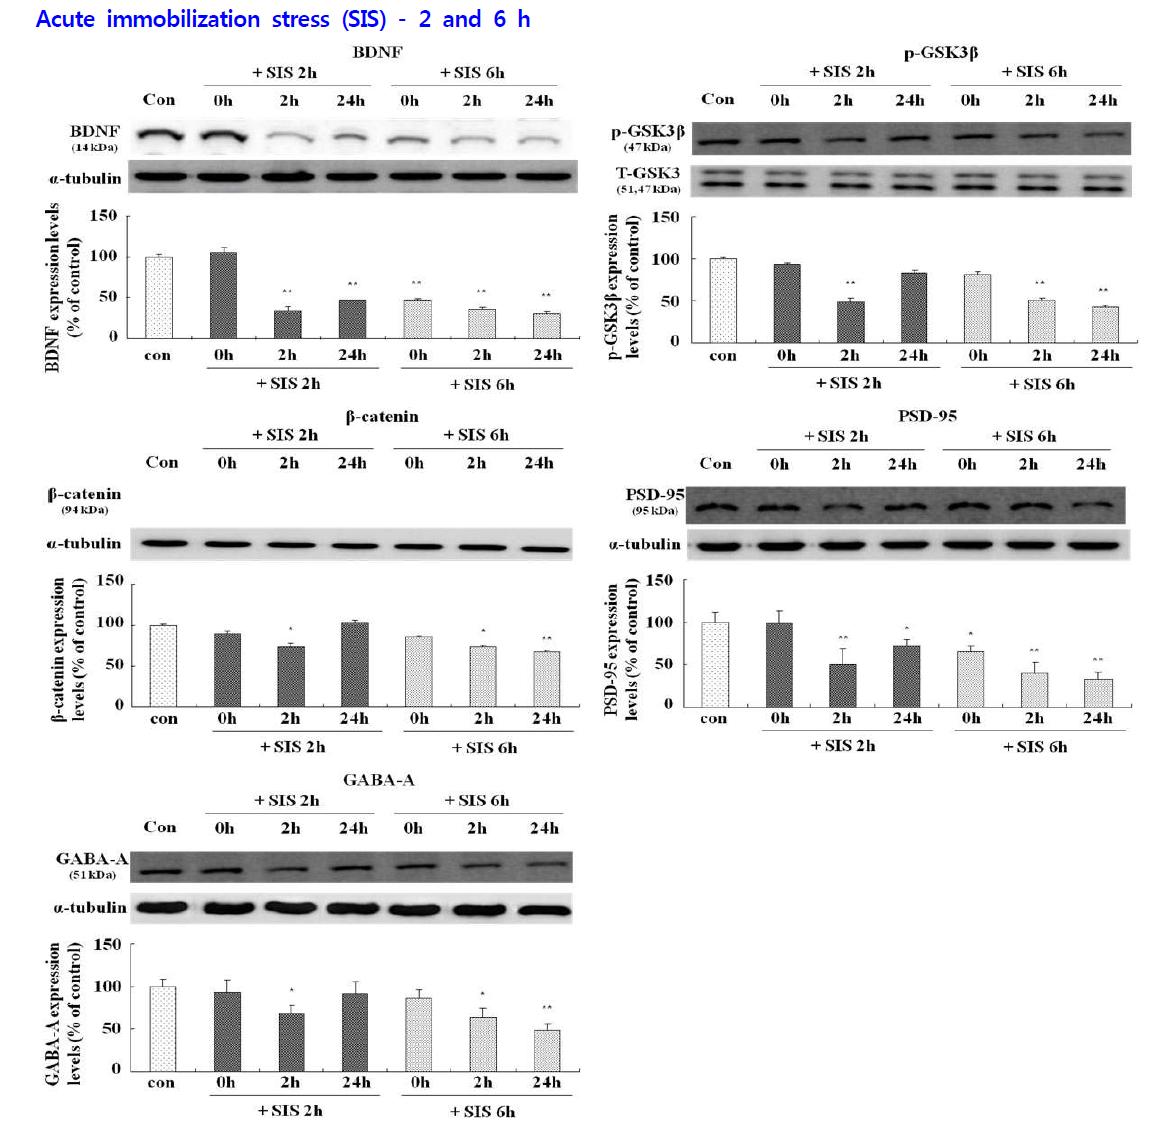 Effects of acute immobilization stress (SIS) on the levels of BDNF, phospho-ser9-GSK-3β, β-catenin, PSD-95 and GABA-A expression in hippocampus of rats